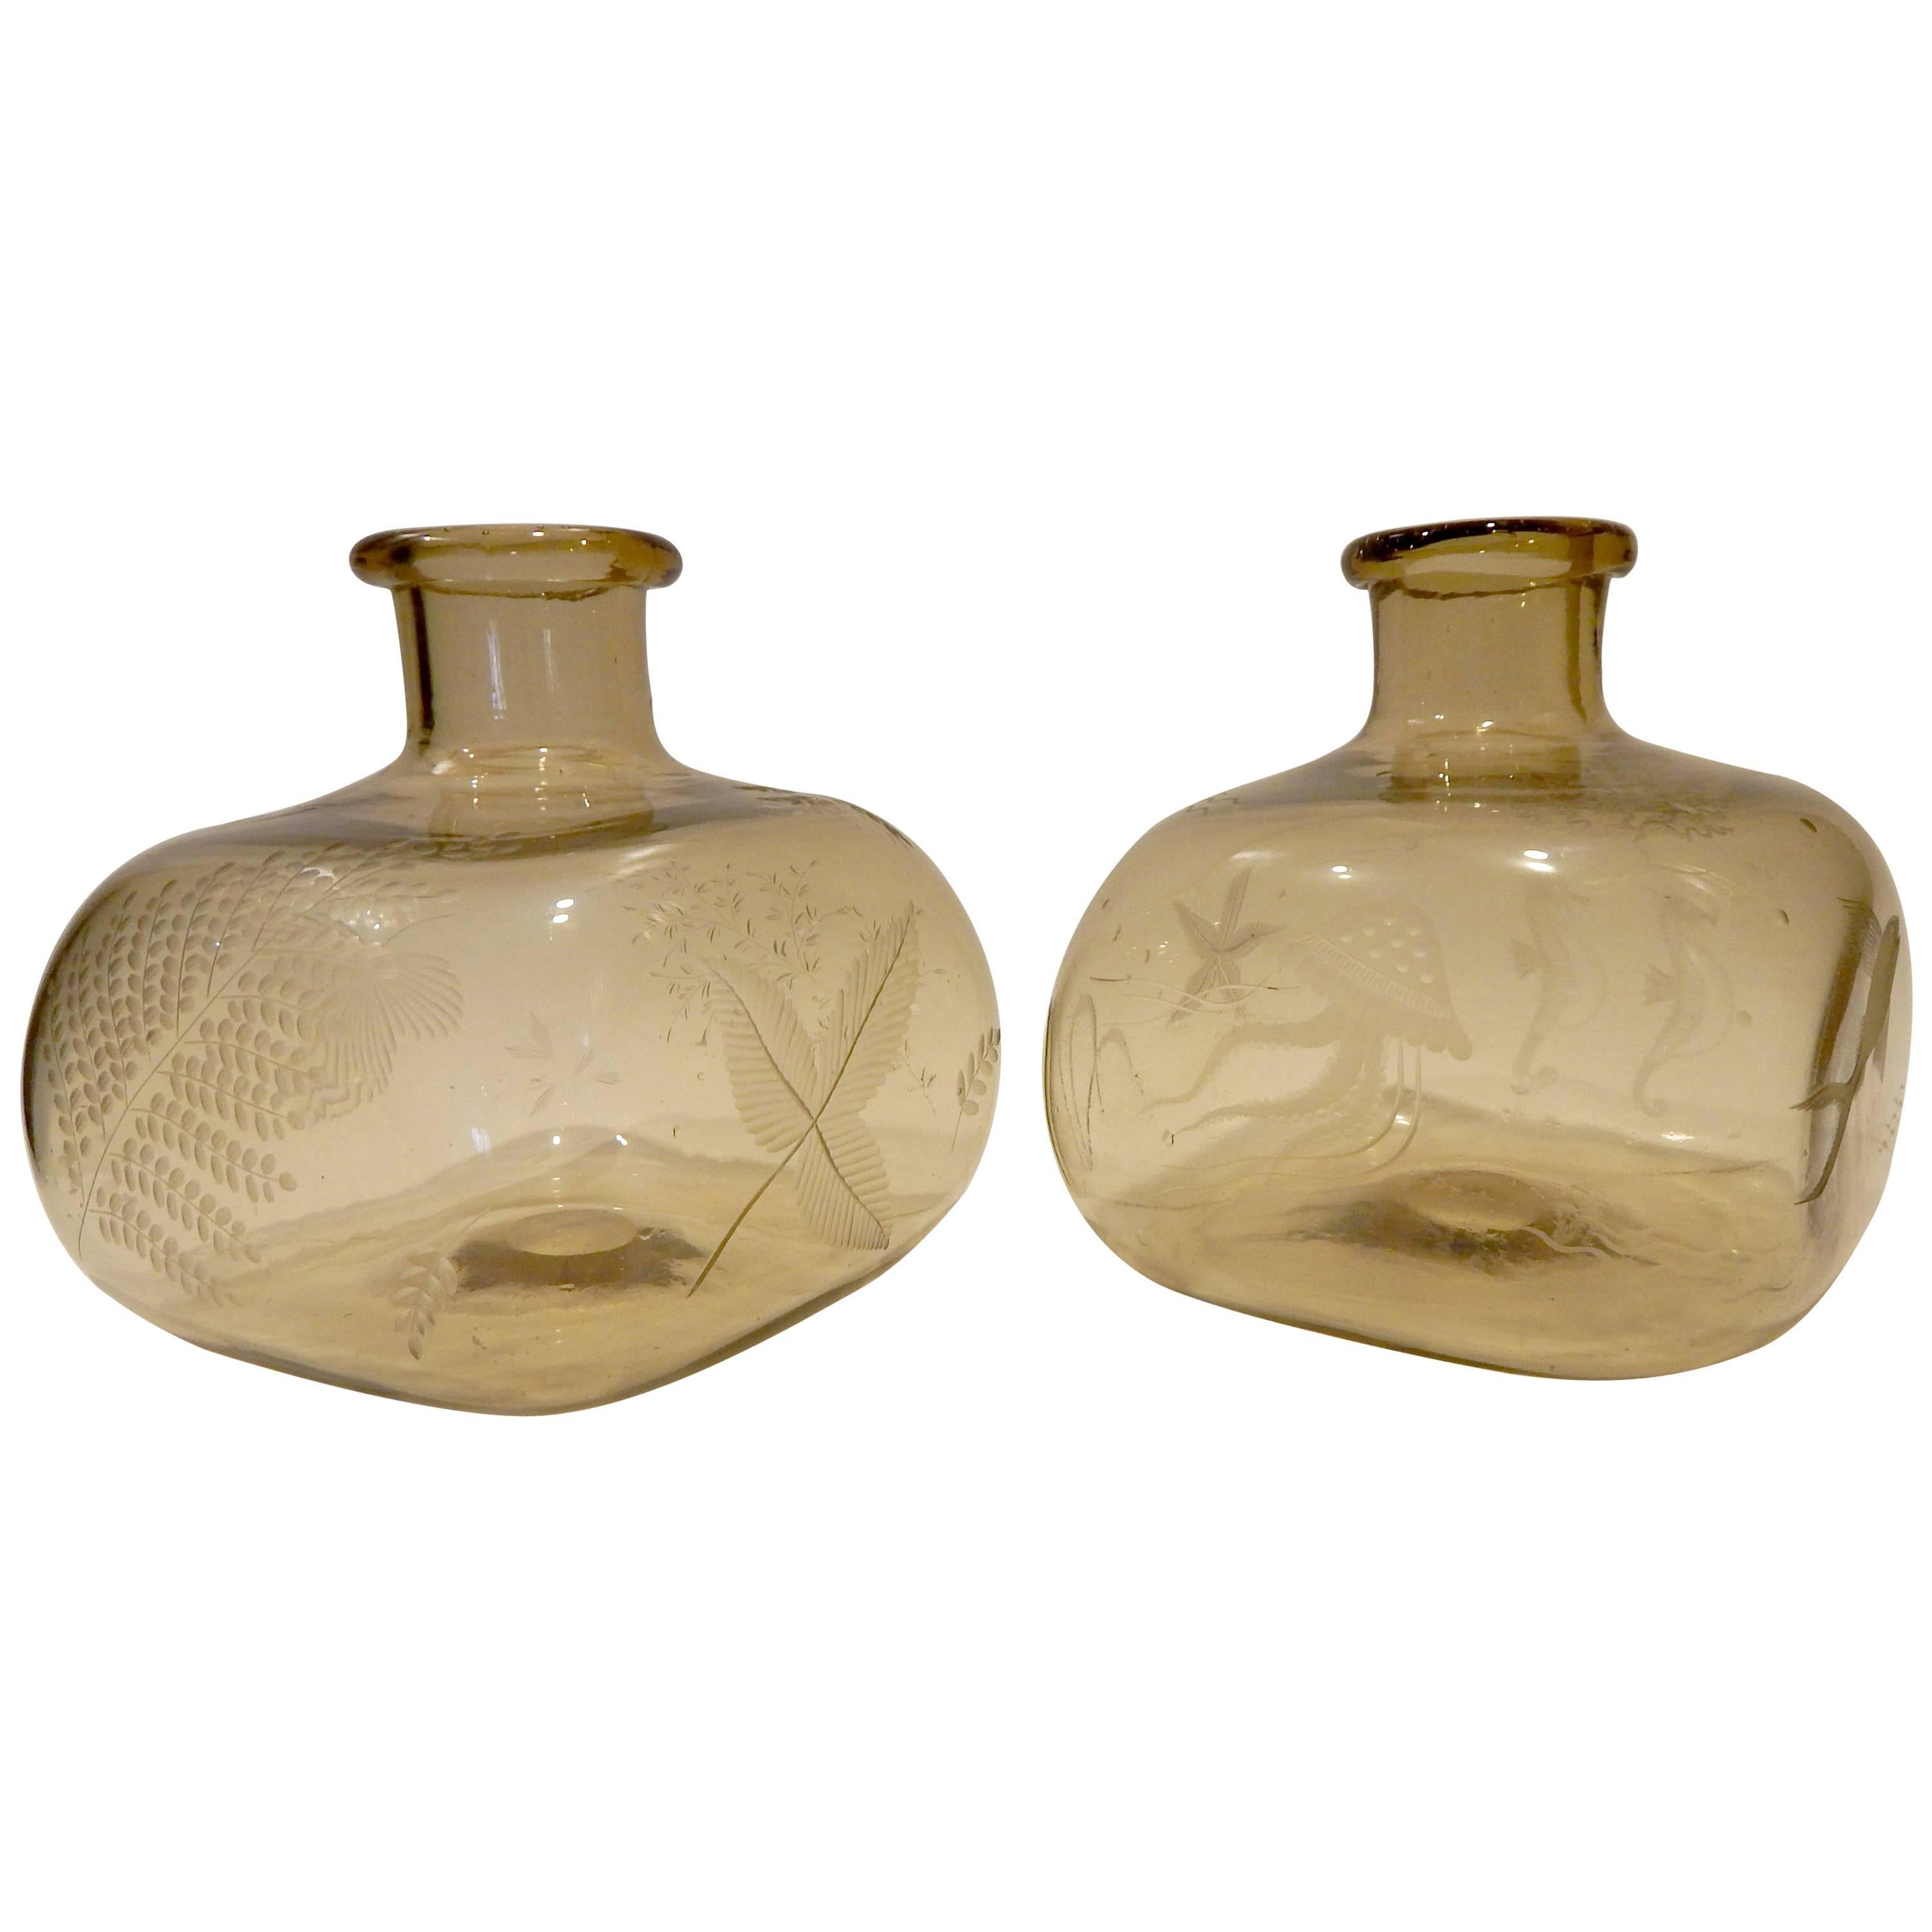 Large Pair of Unusual Moderne Blown Glass Vases, 1940s, Aquatic and Flora Motifs For Sale